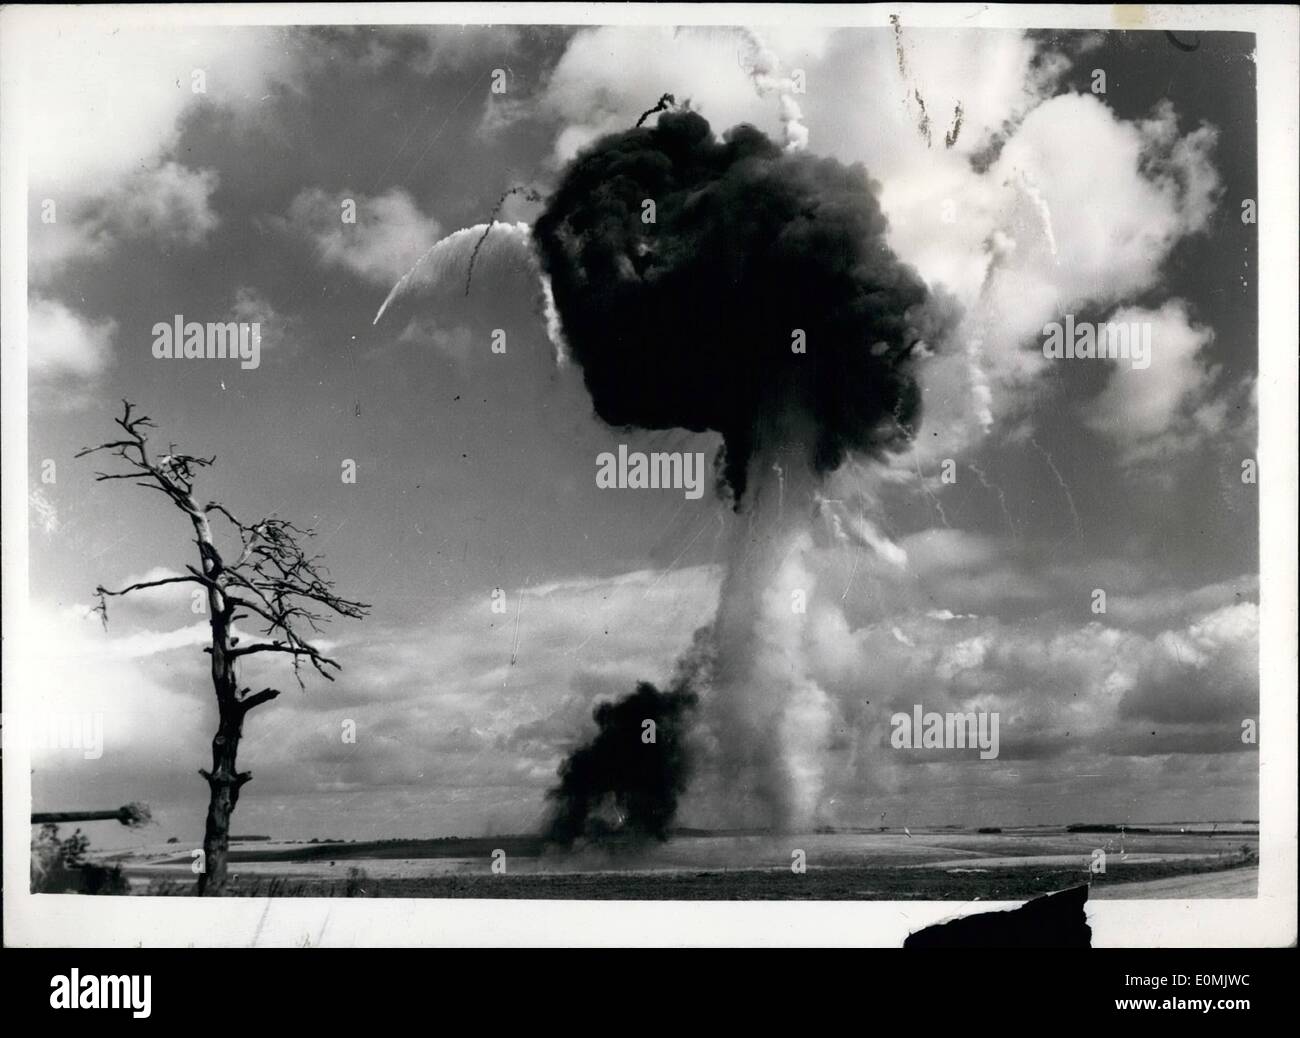 Sep. 09, 1955 - ''Atomic Explosion'' During Army Exercise: A simulated atomic explosion today took place on Salisbury Plain during the three-day exercise ''Ethan Down'', for the 43 (Wessex) Infantry Division (TA). The aim of the exercise is to practice 43 Division, under conditions of nuclear warfare in the occupation of a defensive position and in withdrawal to another defensive position. Photo shows The scene on Salisbury Plain today - during the simulated atomic explosion. Stock Photo